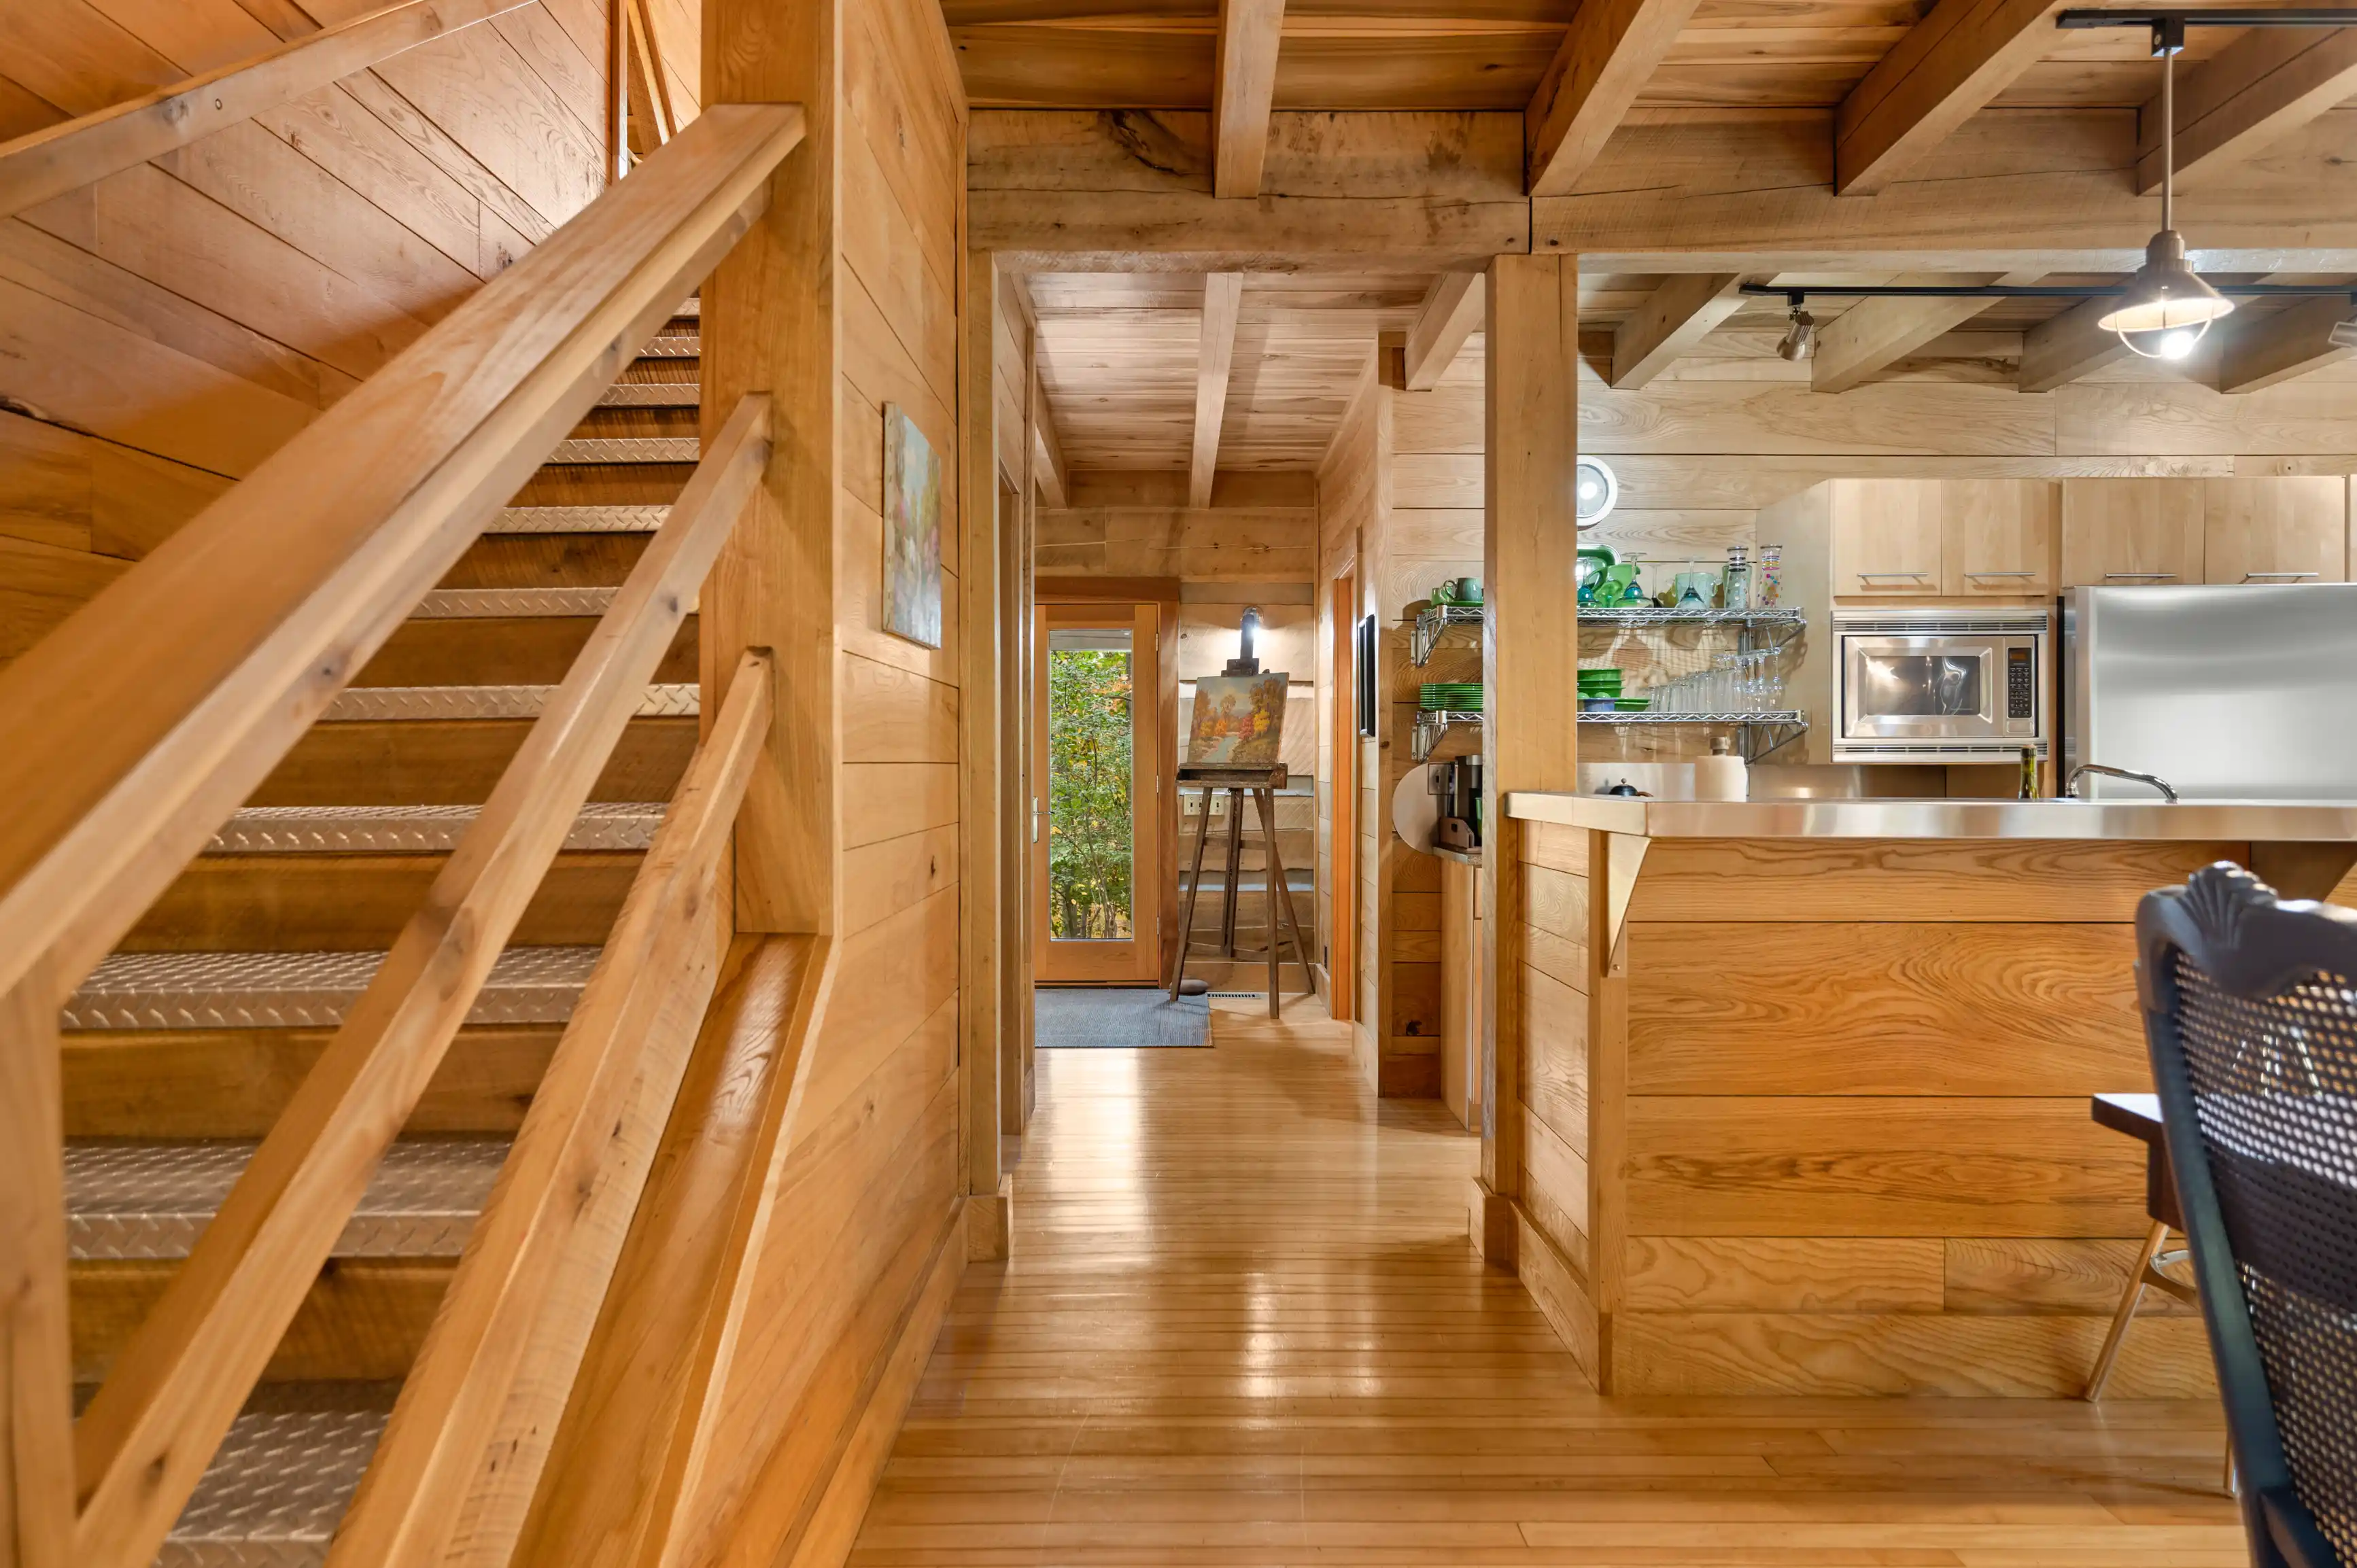 Interior of a cozy wooden cabin featuring a staircase on the left, a kitchen with modern appliances to the right, and a glimpse of a bright doorway ahead.